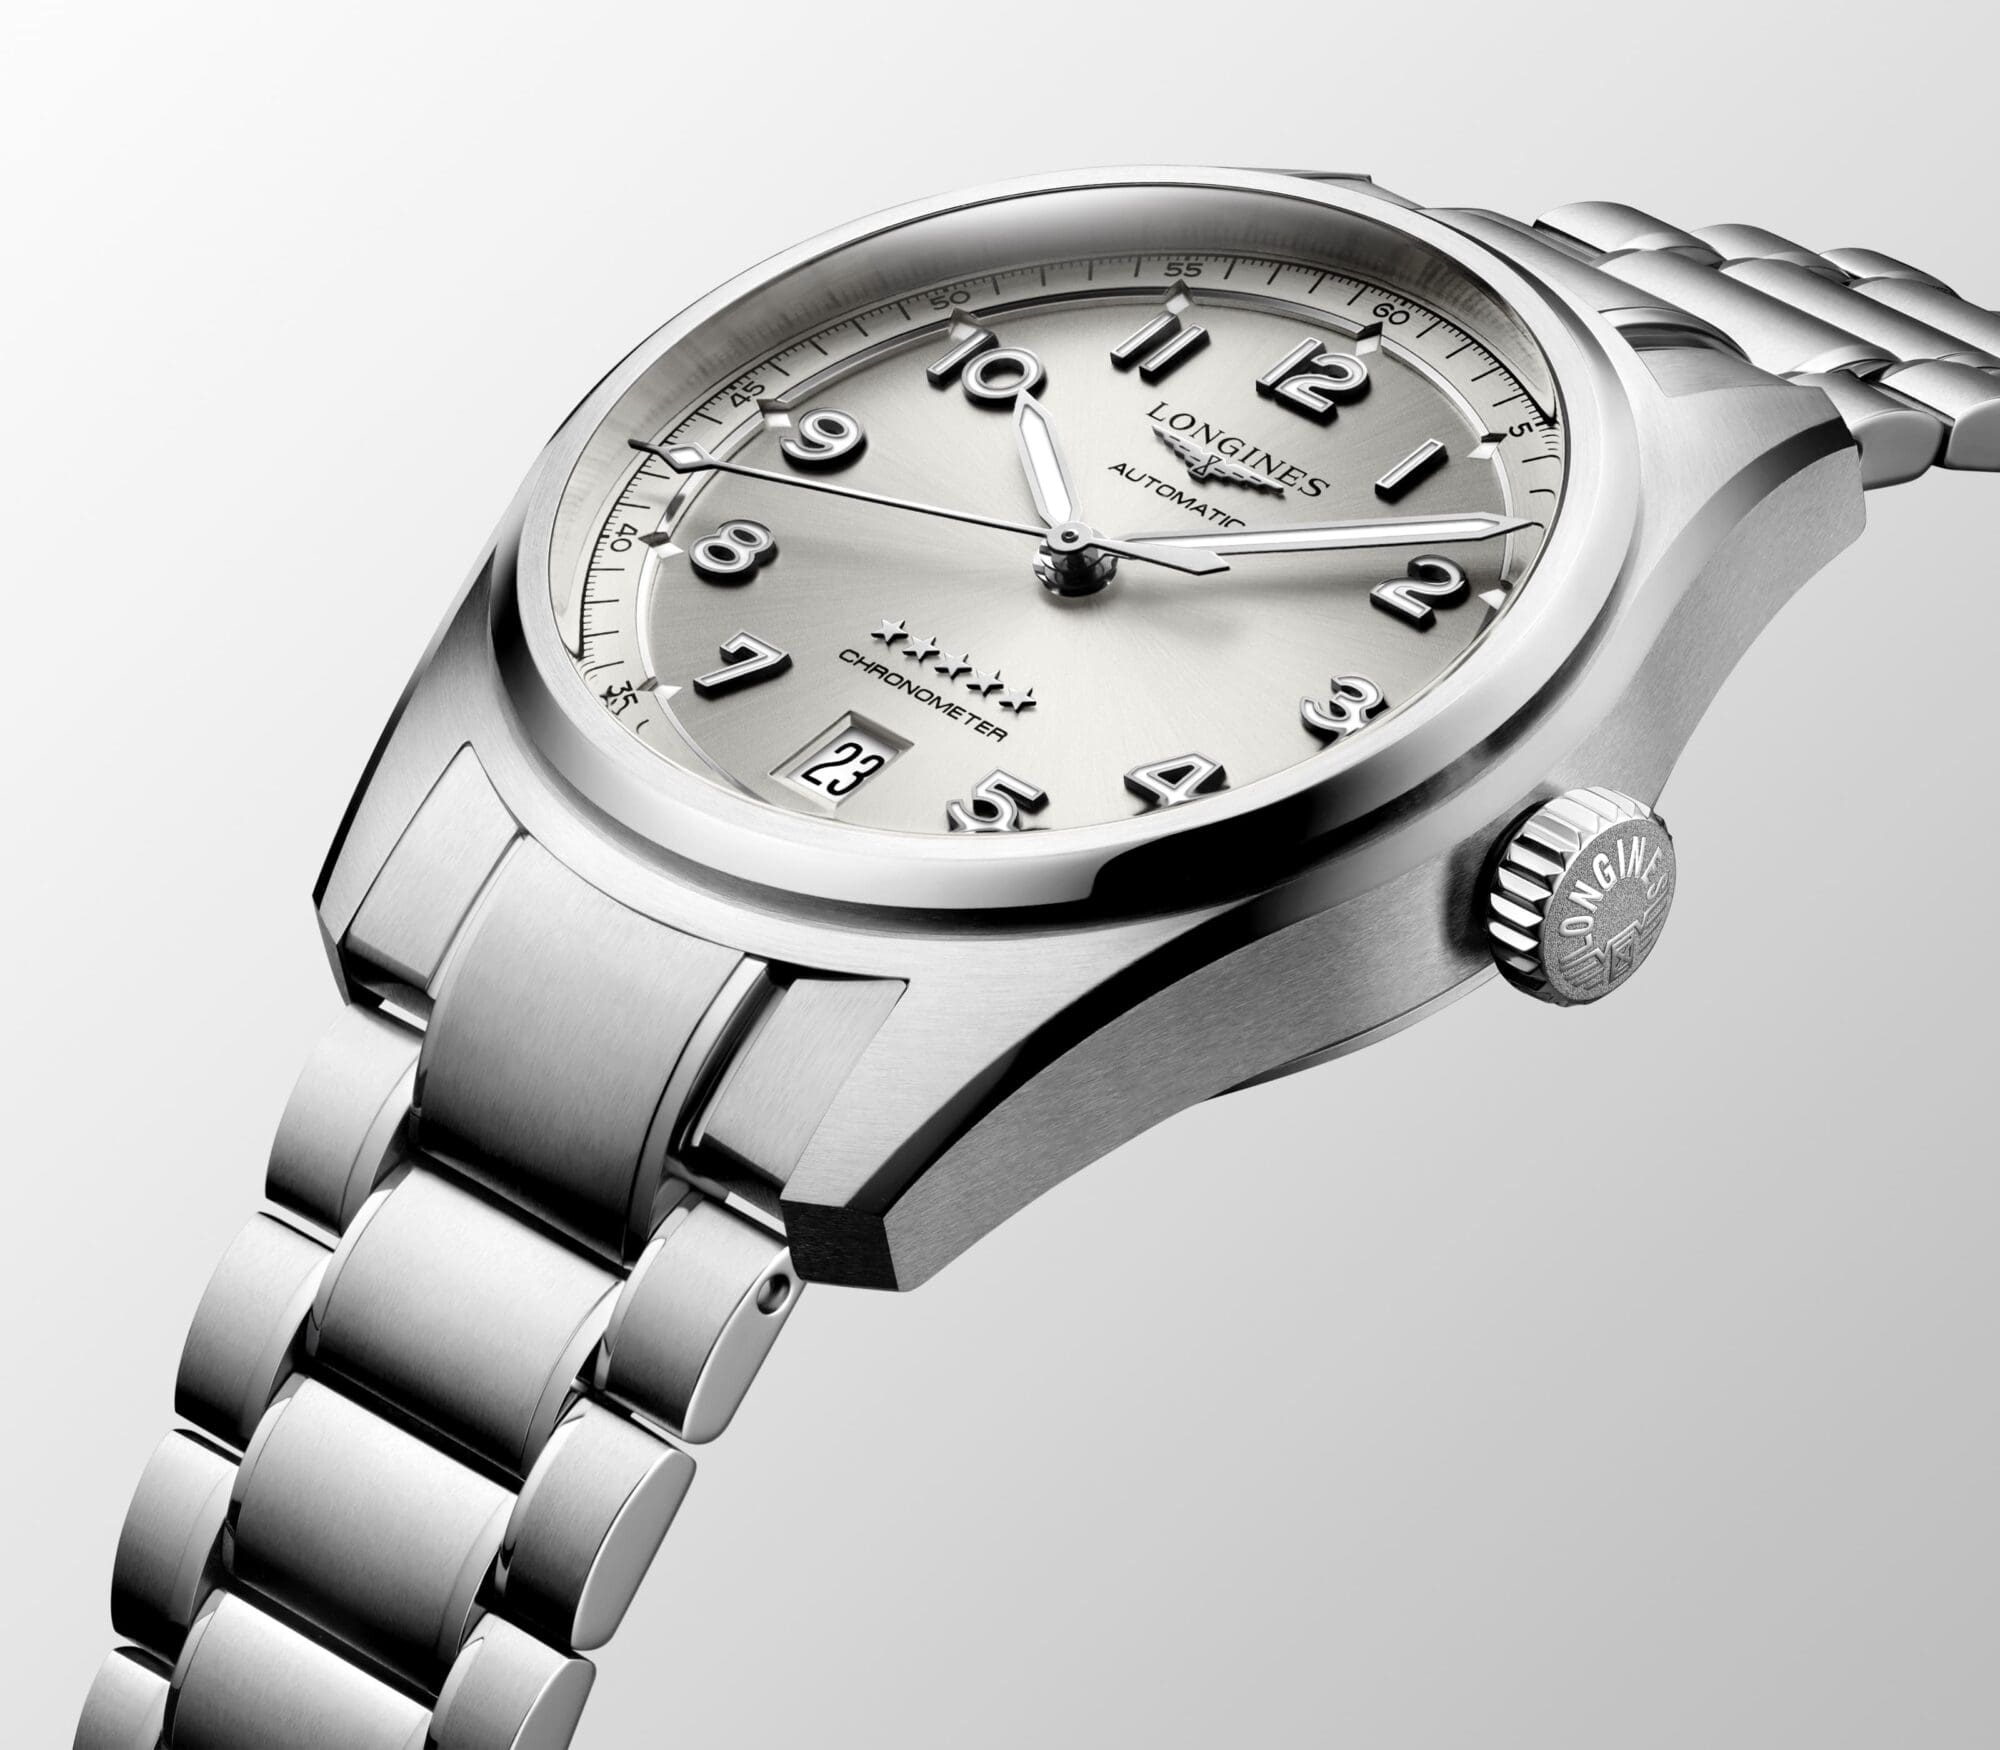 INTRODUCING: The tiny modification to the Longines Spirit 37 collection that make the watches even better